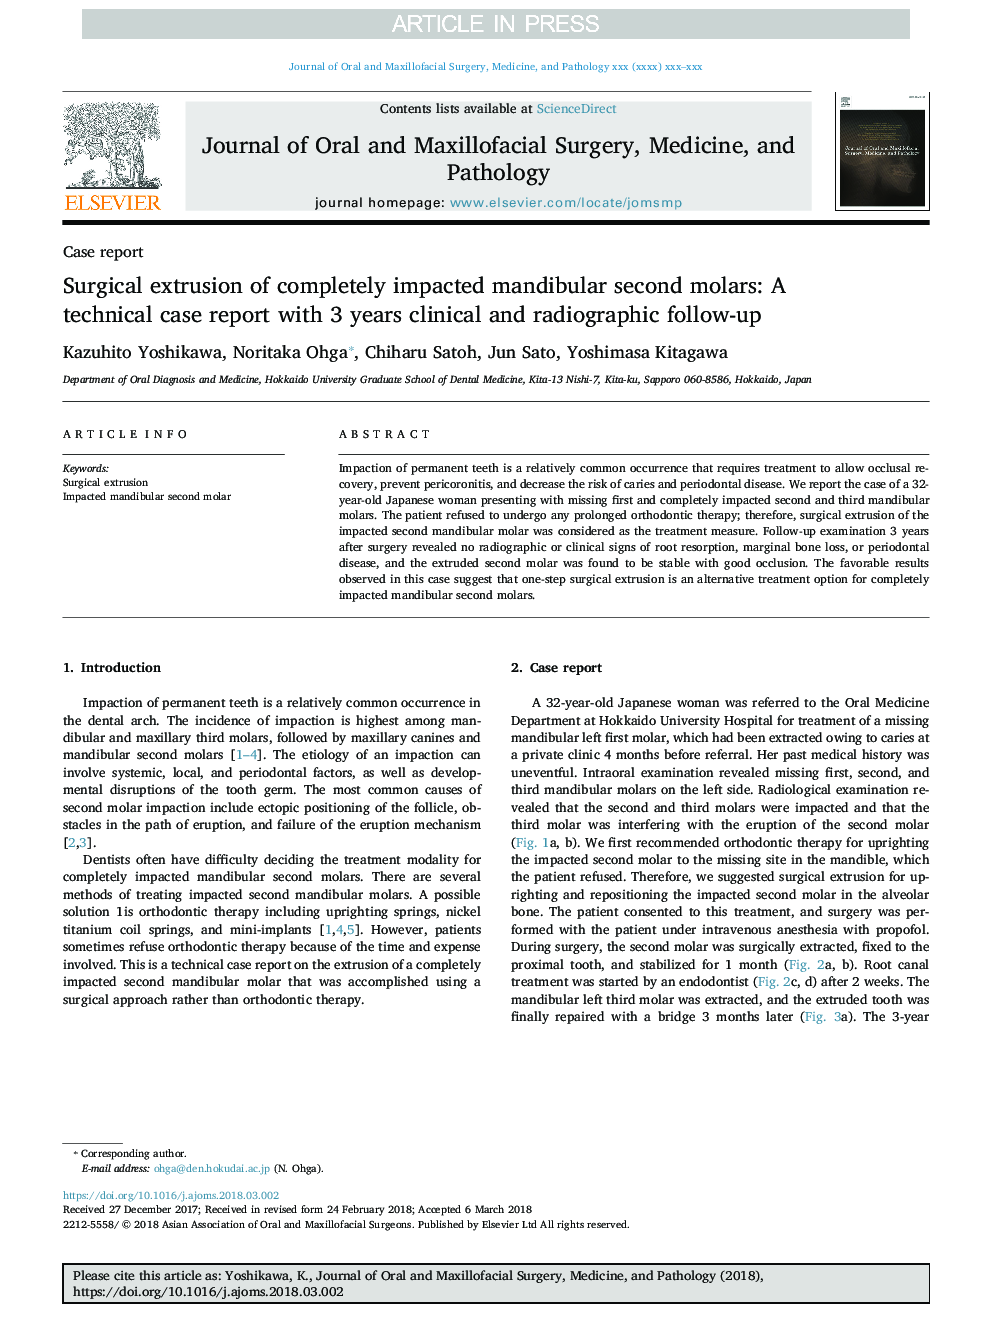 Surgical extrusion of completely impacted mandibular second molars: A technical case report with 3 years clinical and radiographic follow-up